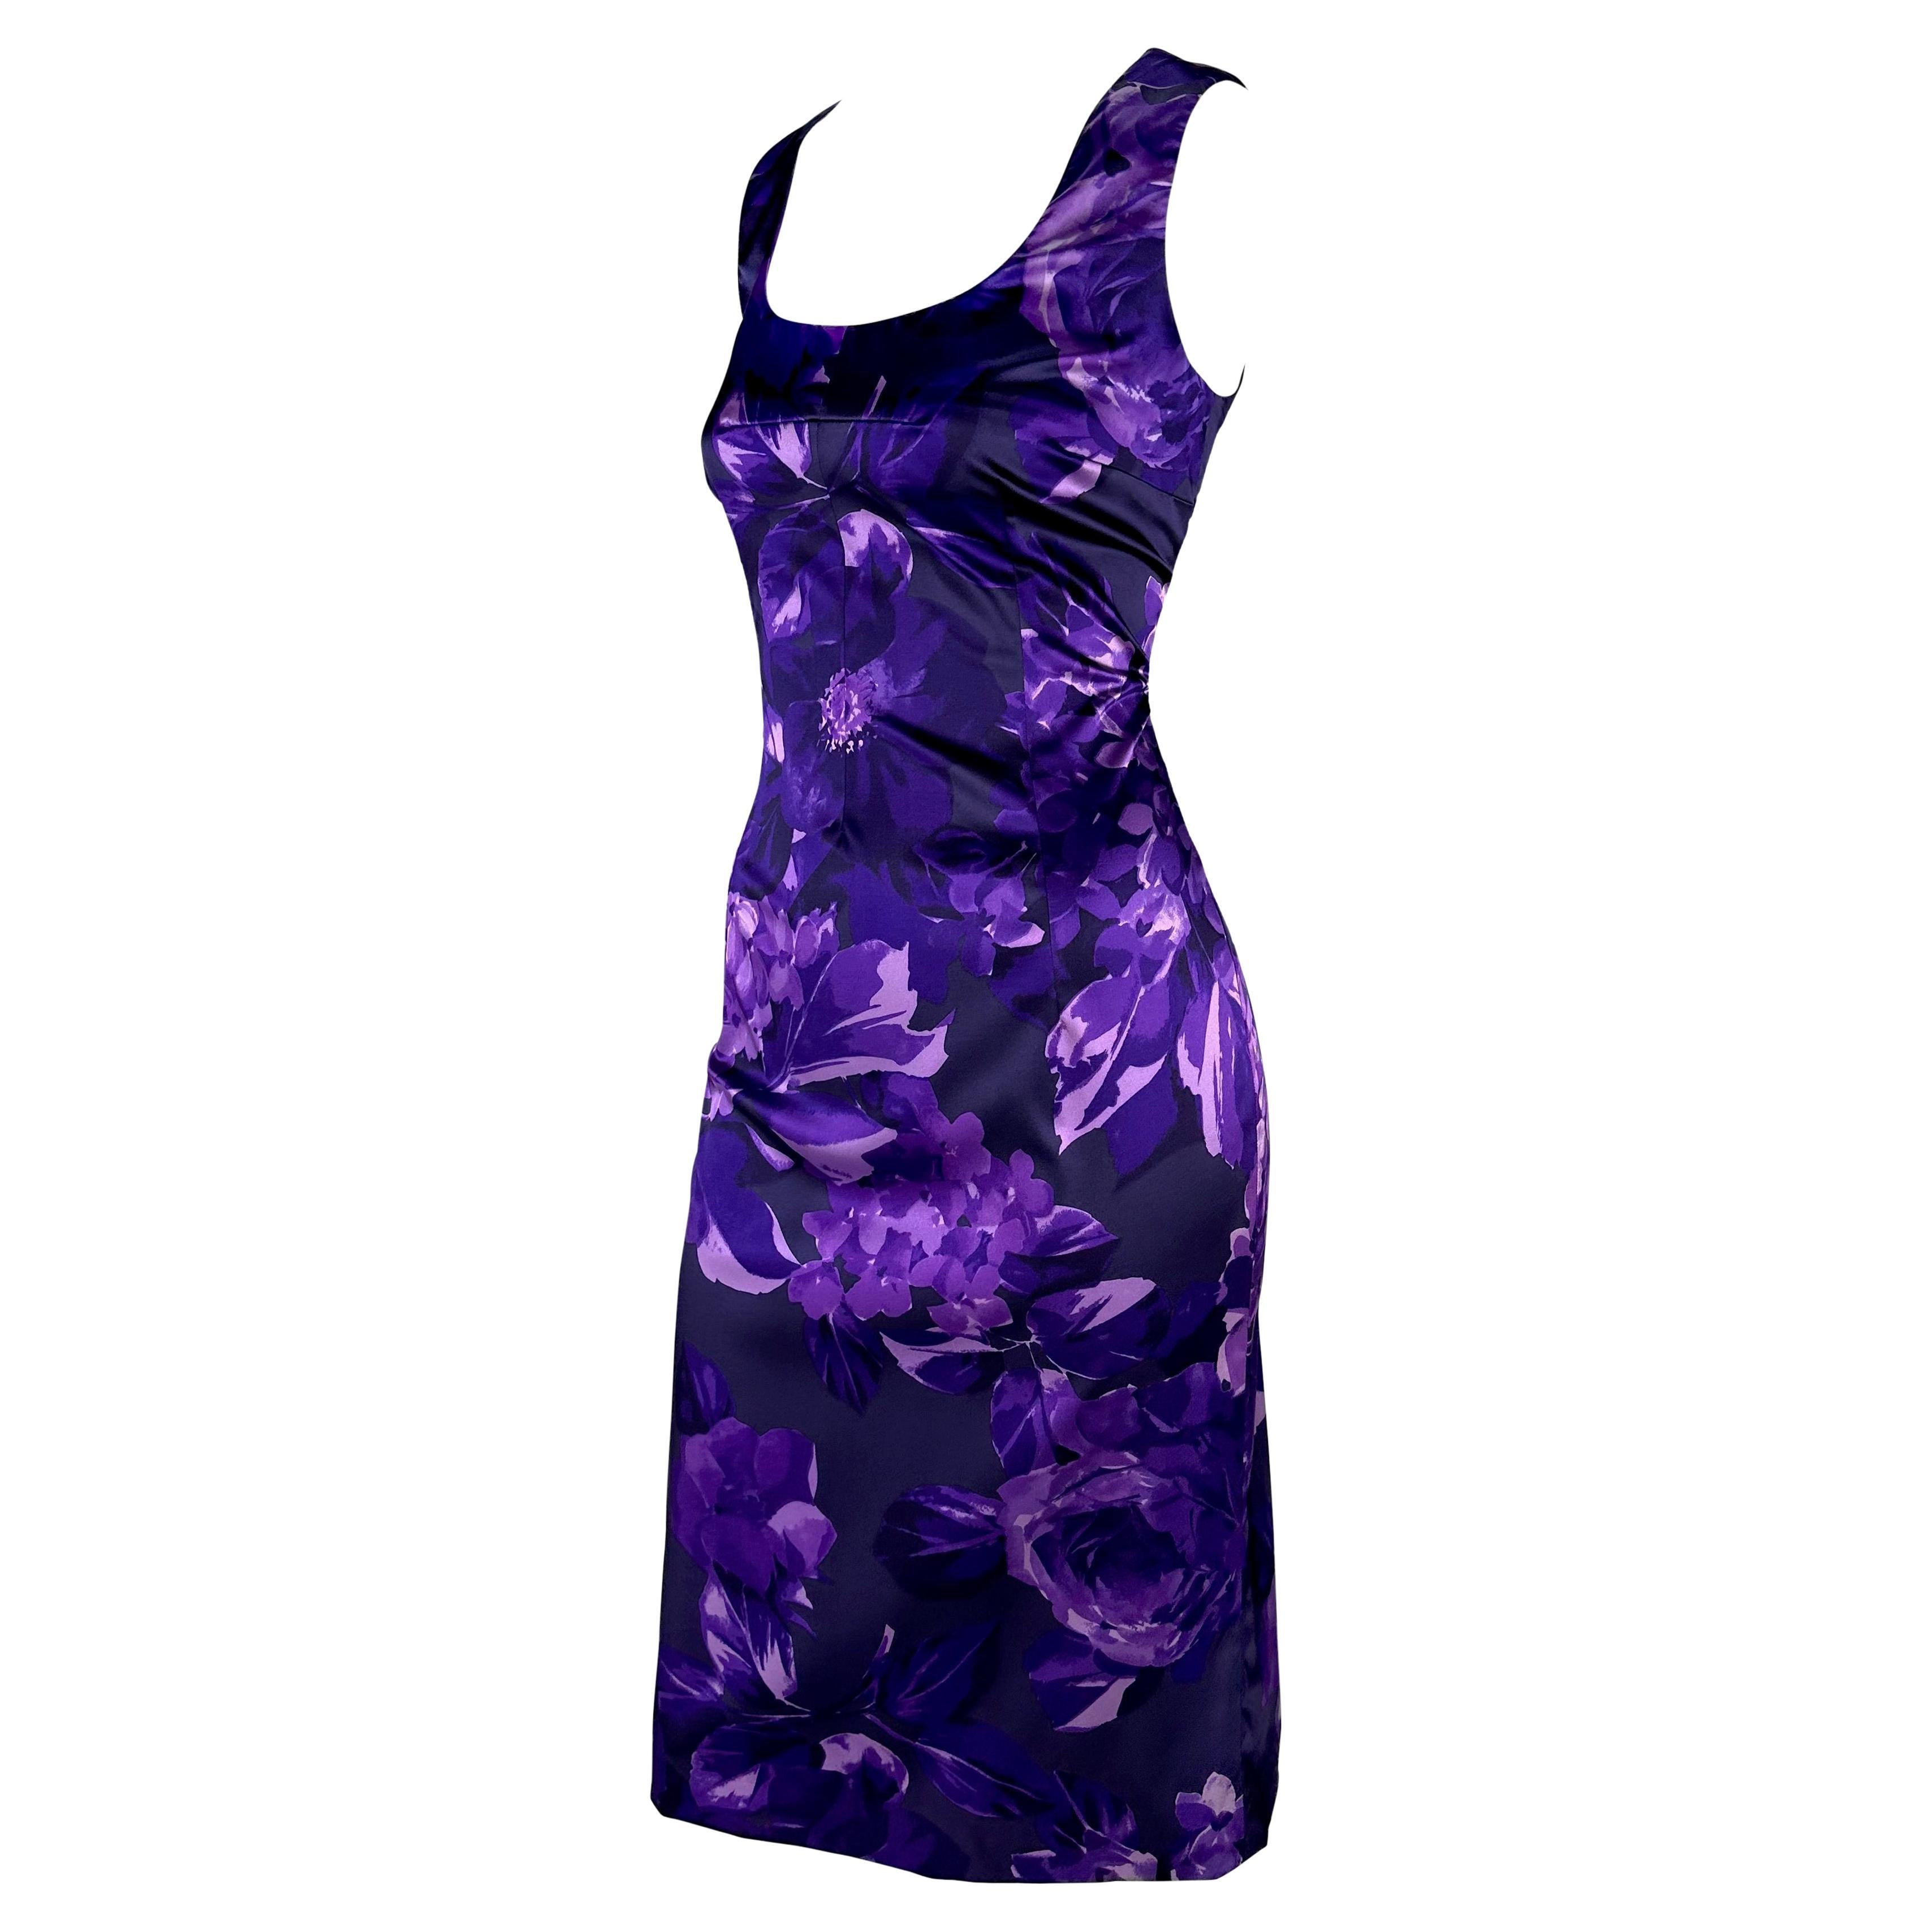 2000 Dolce & Gabbana Purple Floral Print Bodycon Stretch Sleeveless Dress In Excellent Condition For Sale In West Hollywood, CA